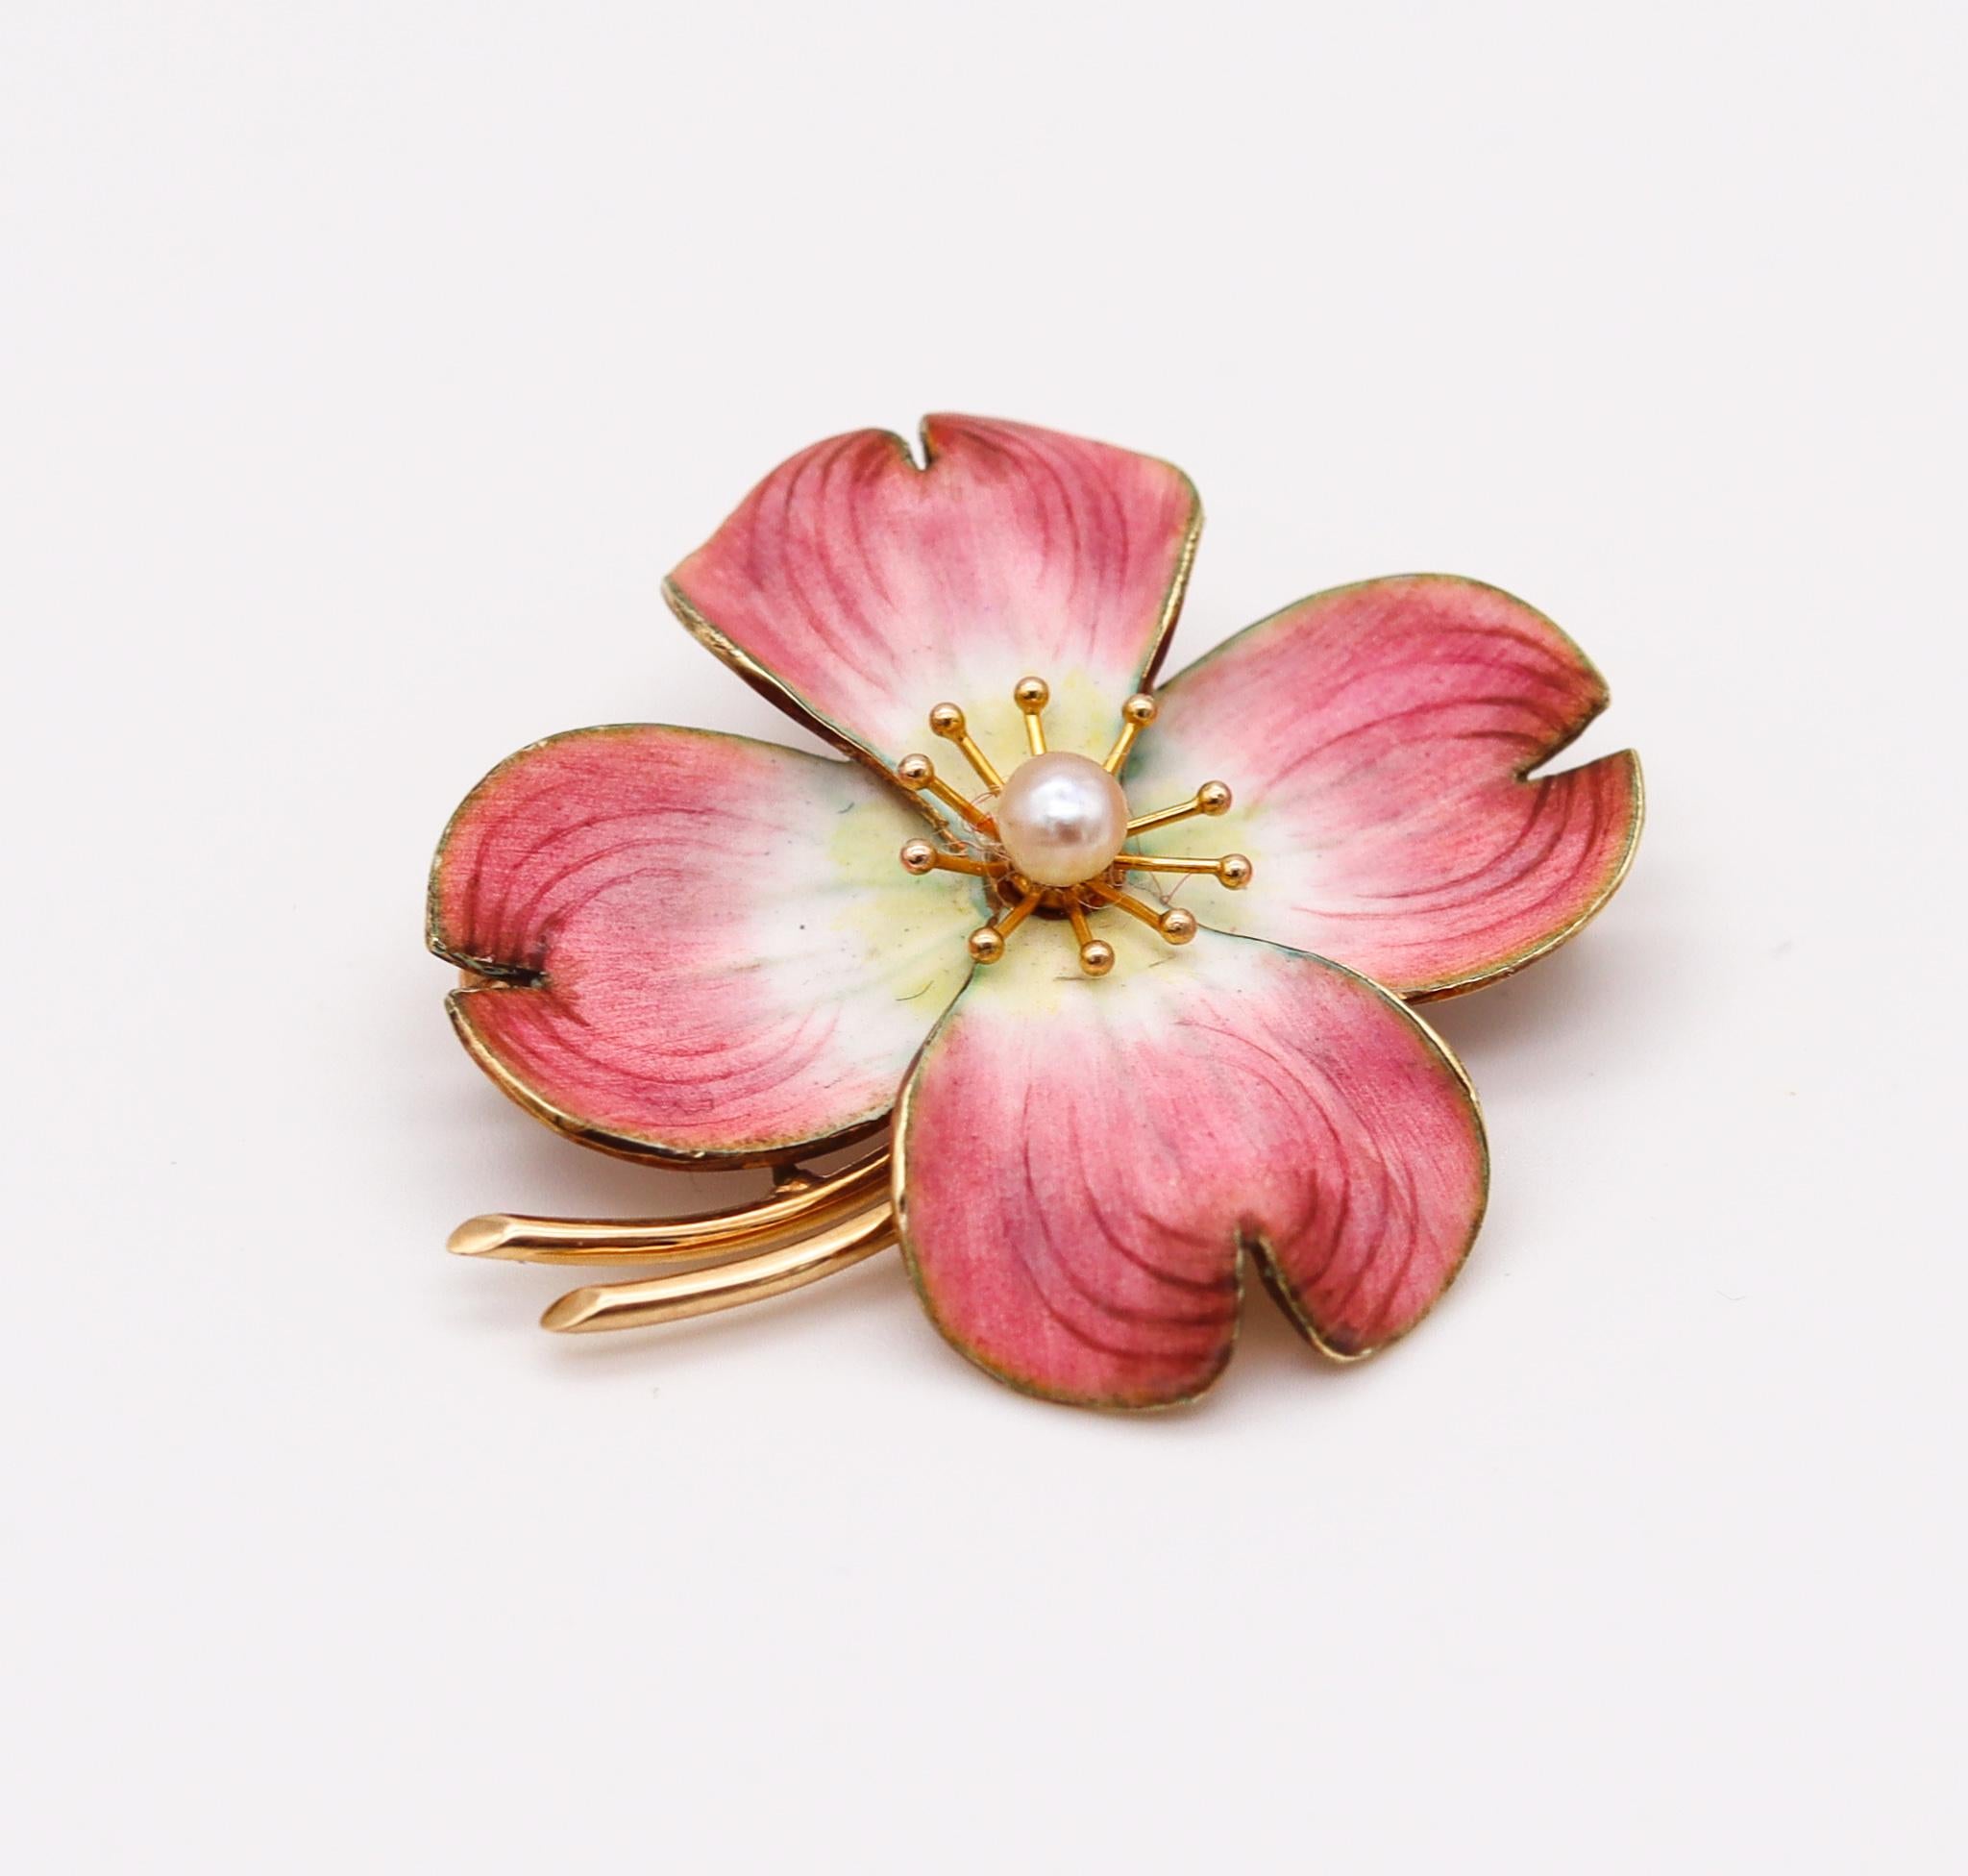 Edwardian Enameled Clematis pink flower pin created by Krementz & Co.

Stunning piece, created in America during the transitional period of the Edwardian and the Art Nouveau, back in the 1900-1910. This beautiful pin brooch has been carefully